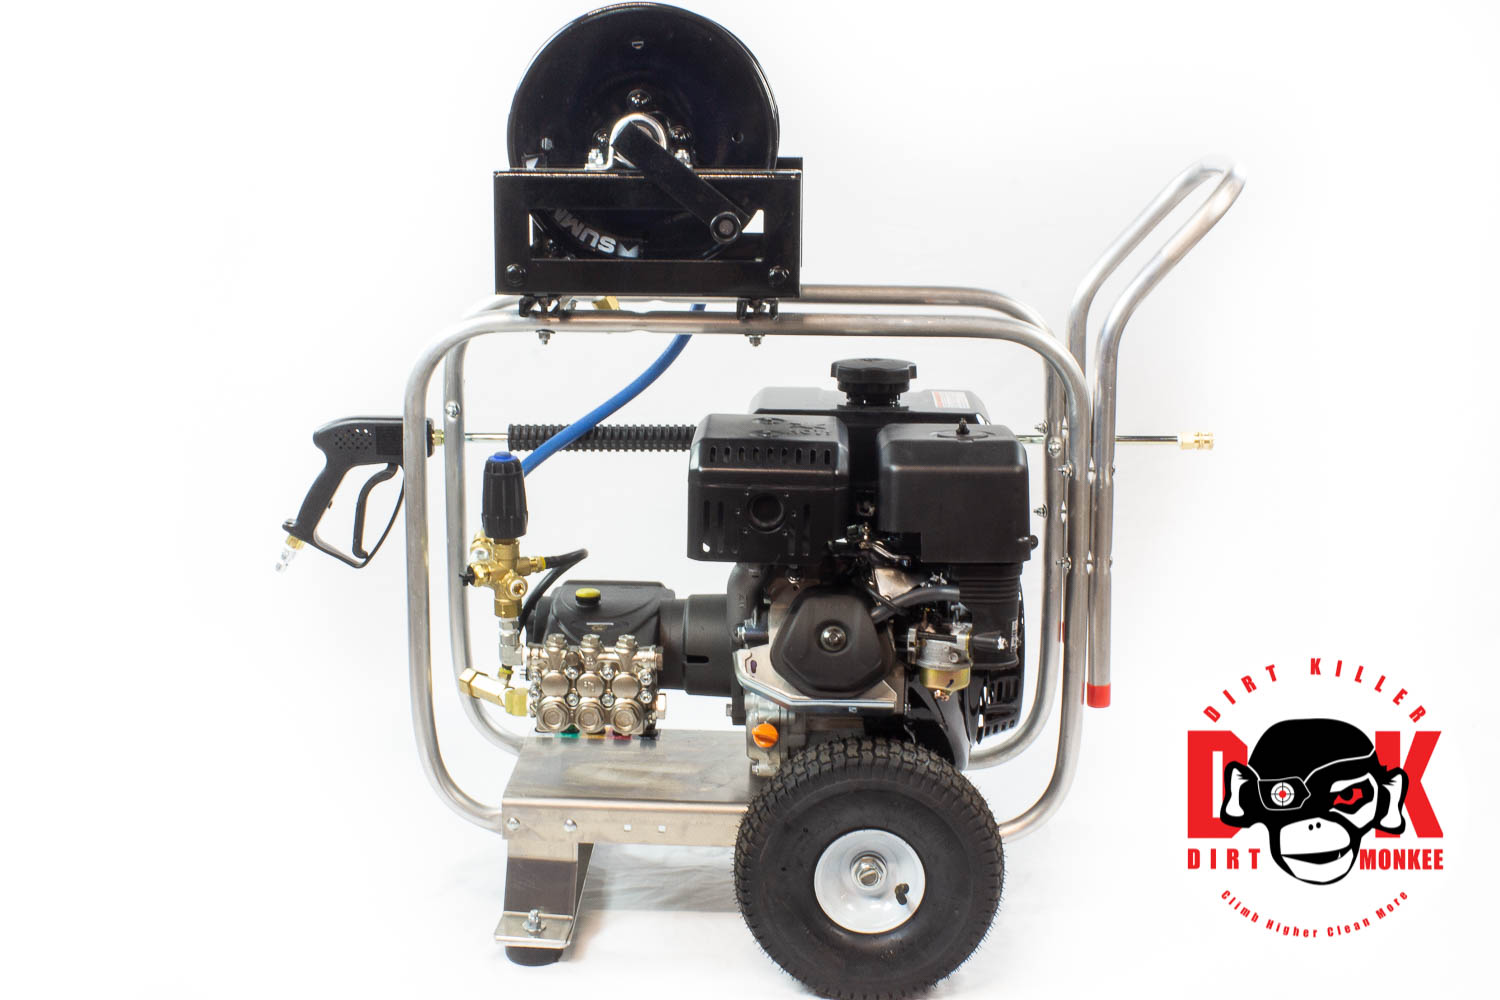 Dirt Monkee 15hp Power Ease General ESN pump 5.3 gpm 3000 psi rollover frame hose reel-image_1.3 gpm 3000 psi rollover frame hose reel-image_1